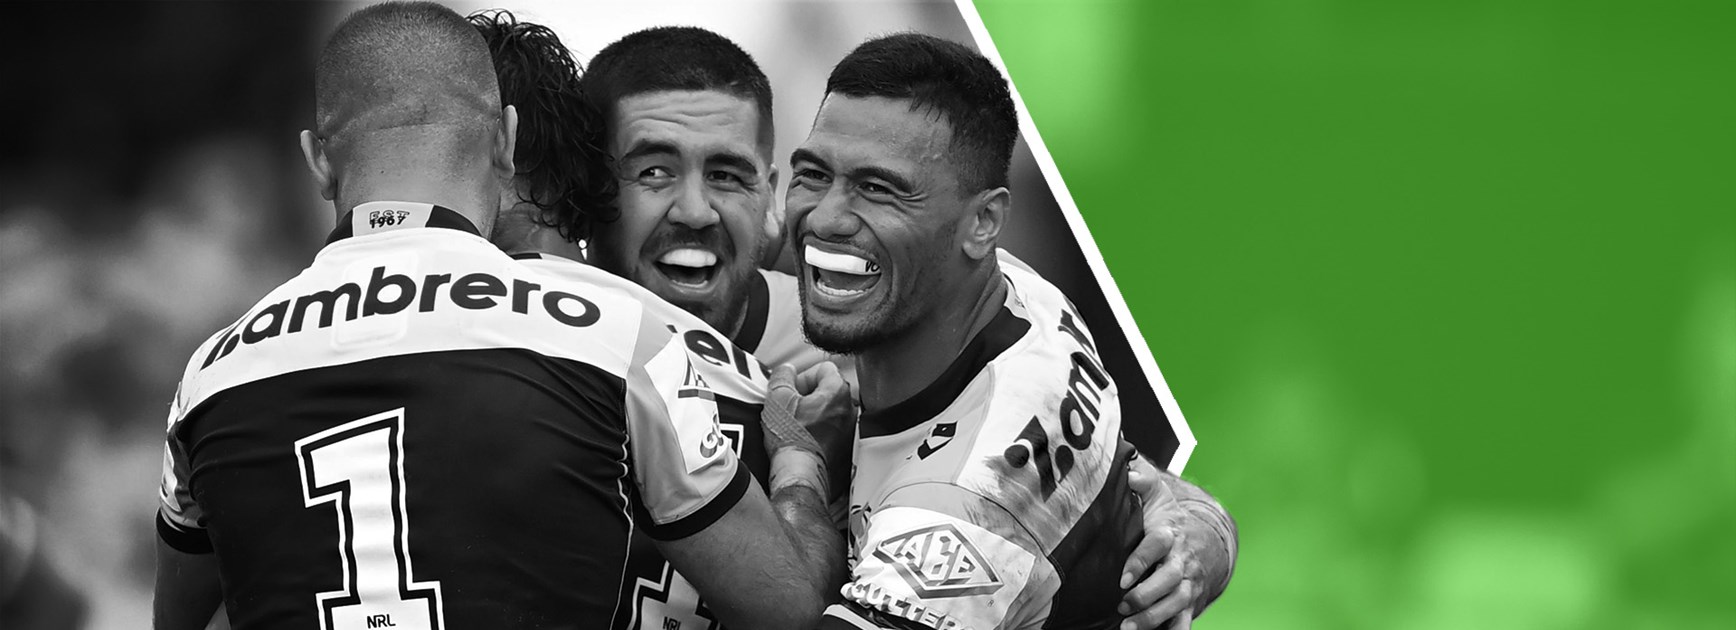 NRL Tipping: Expert tips for Round 13